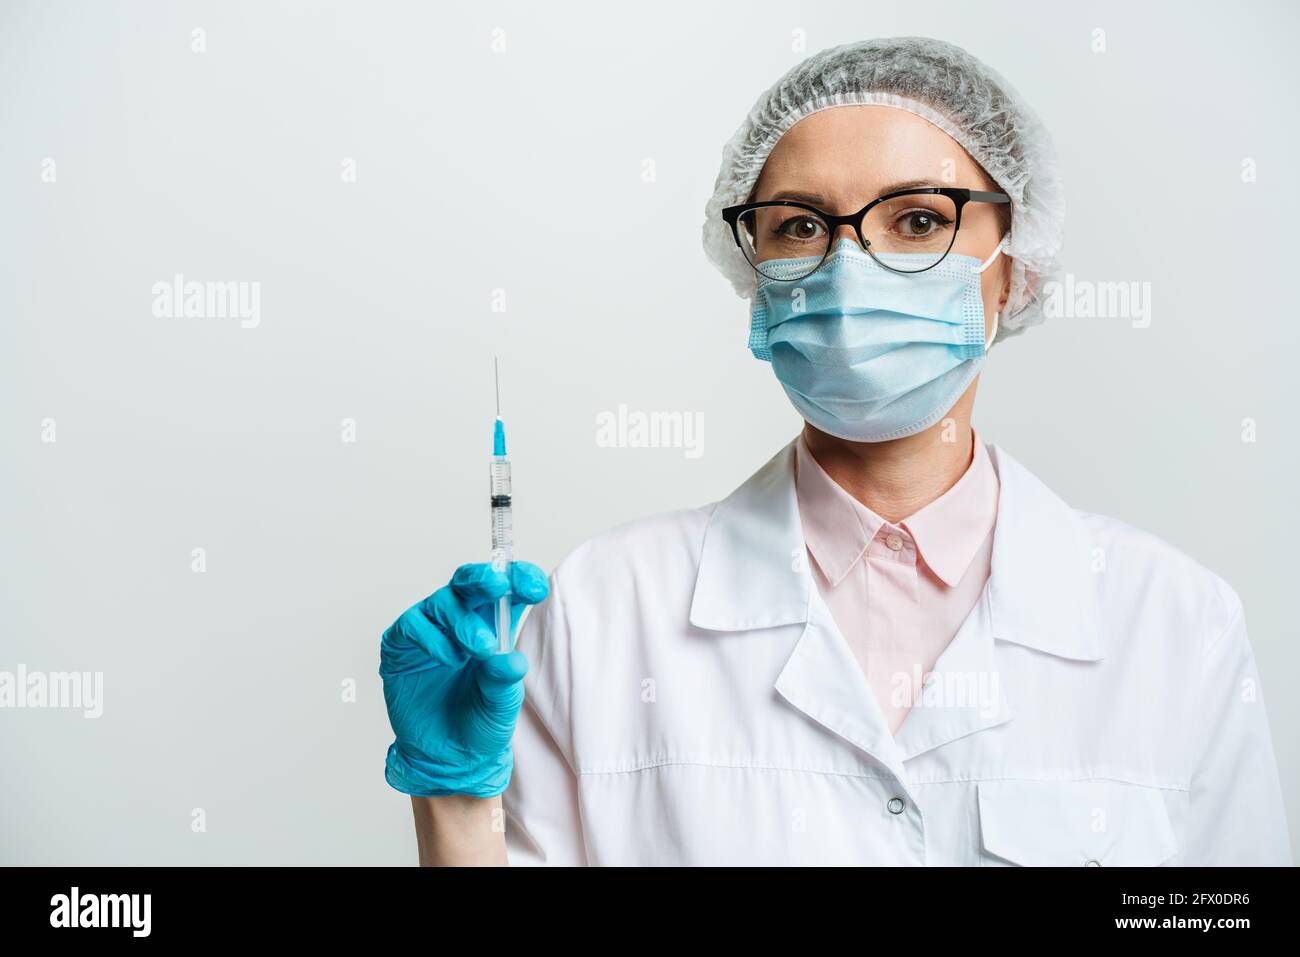 A nurse holds a syringe before making a vaccine against Covid-19 or coronavirus. Stock Photo